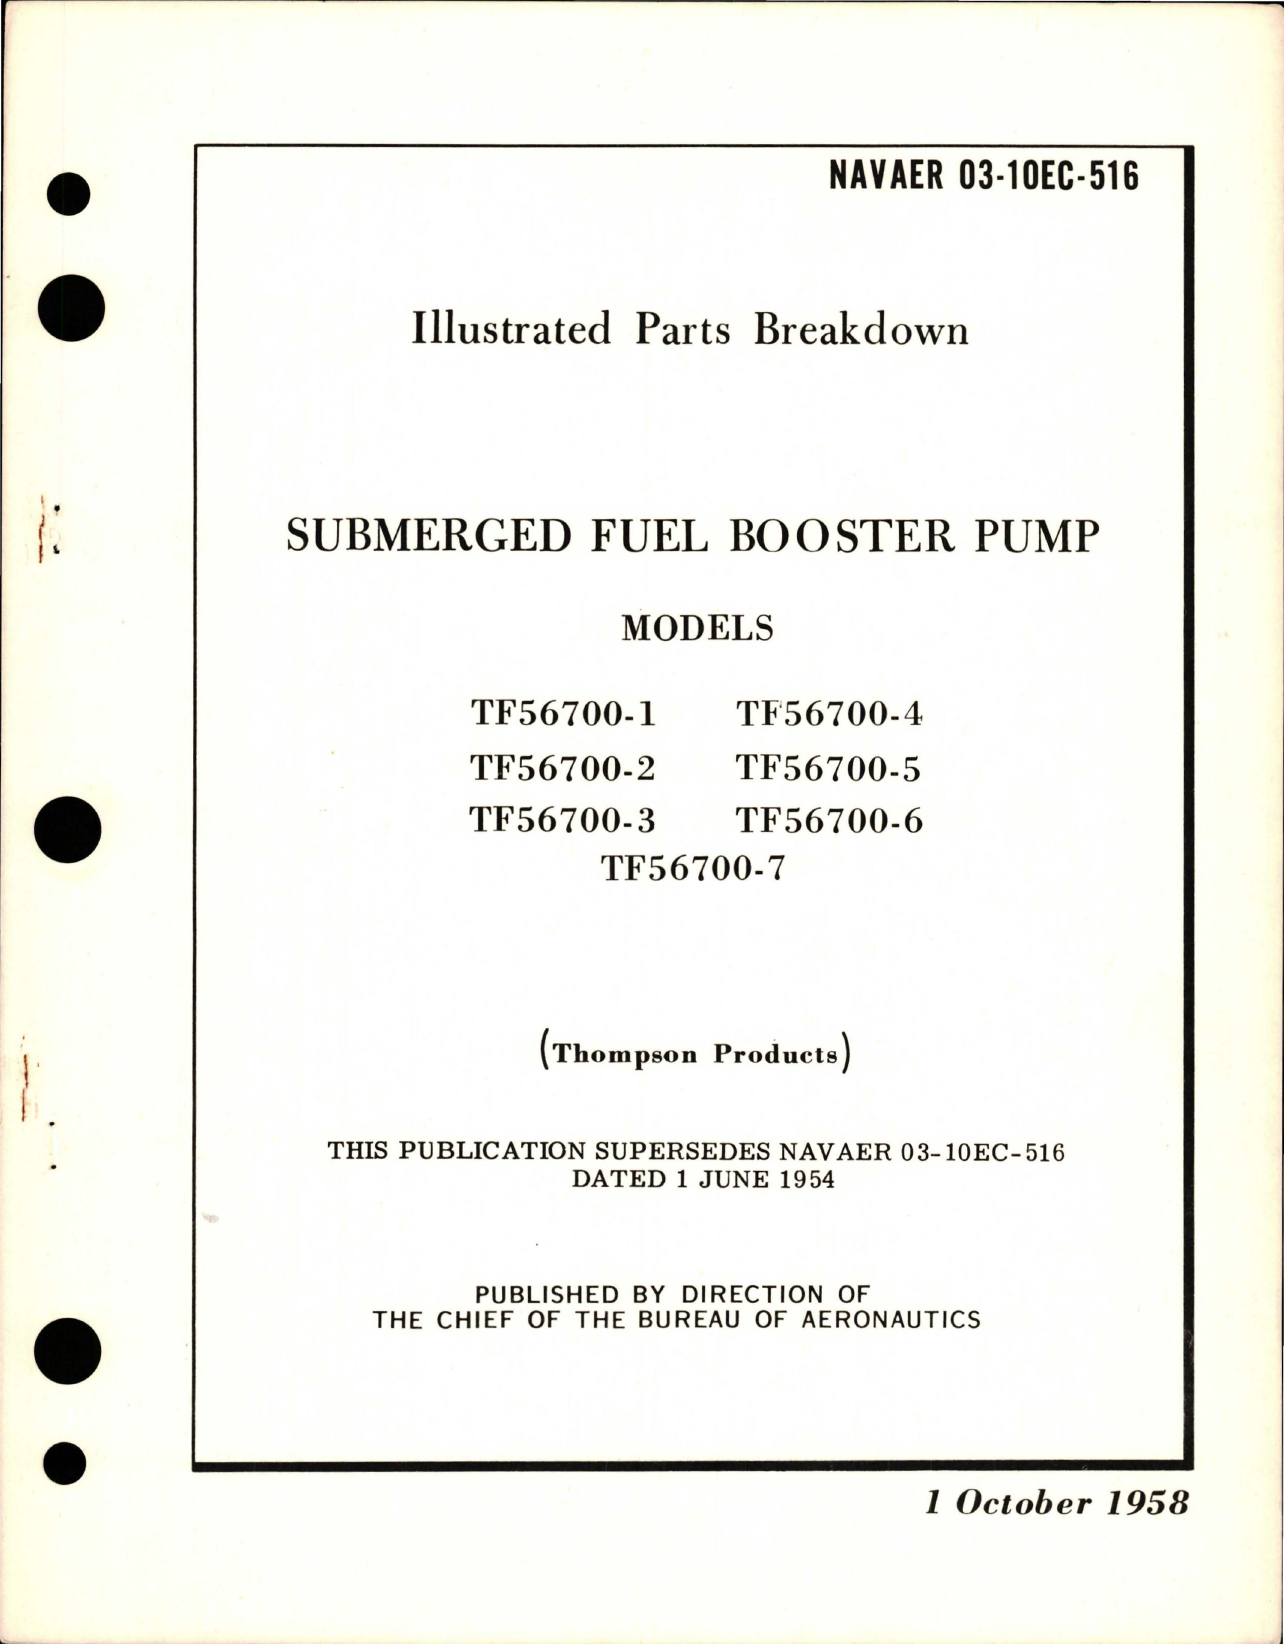 Sample page 1 from AirCorps Library document: Illustrated Parts Breakdown for Submerged Fuel Booster Pump